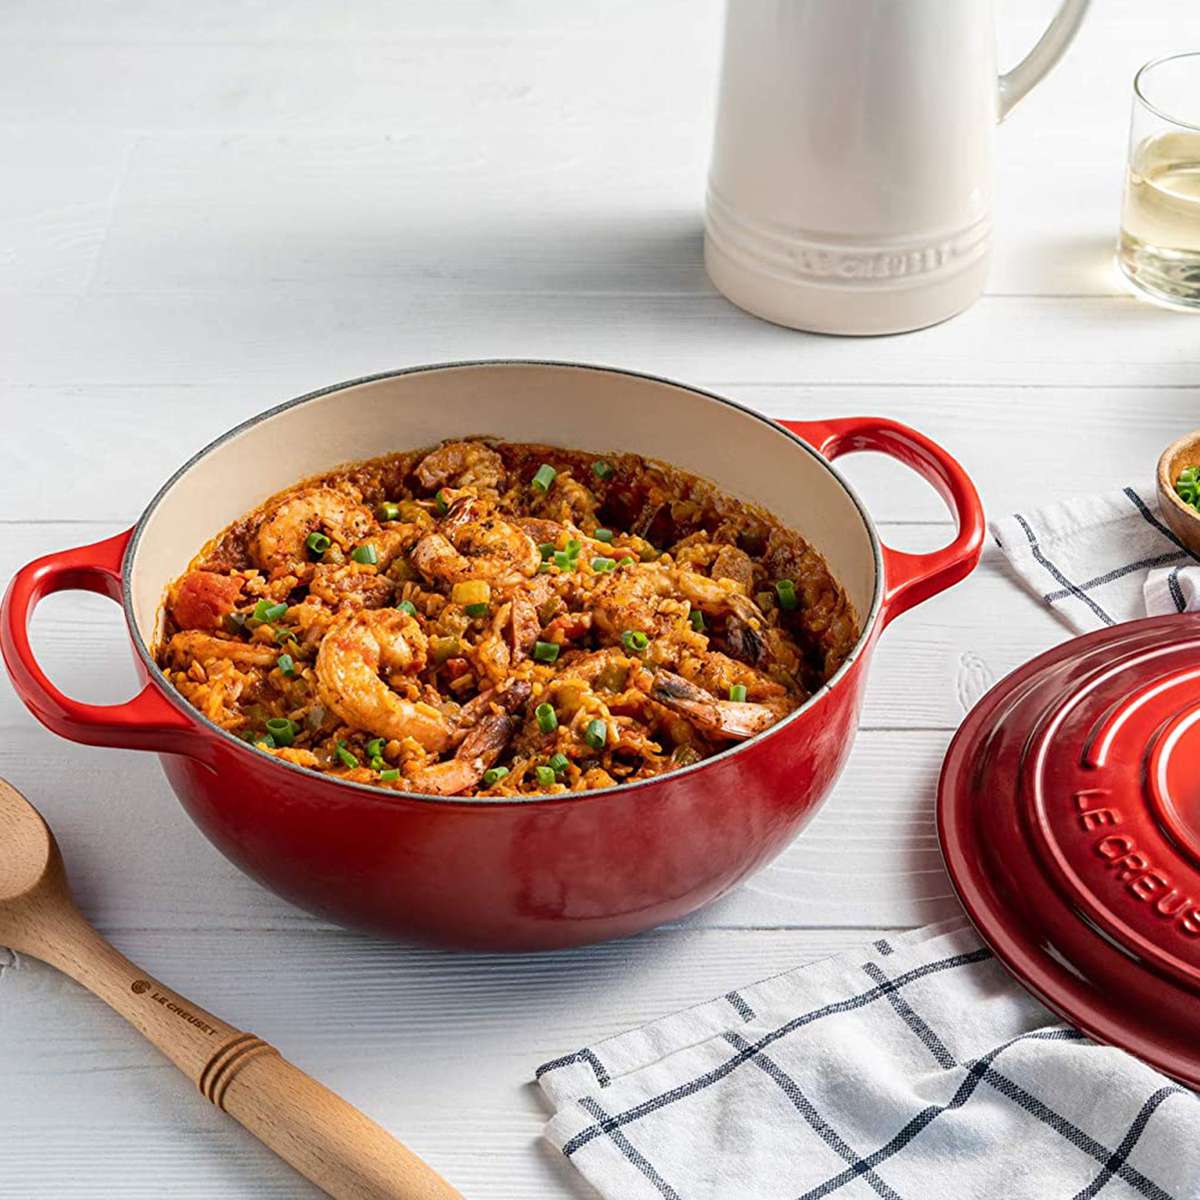 Le Creuset Enameled Cast Iron Signature Sauteuse Oven in red